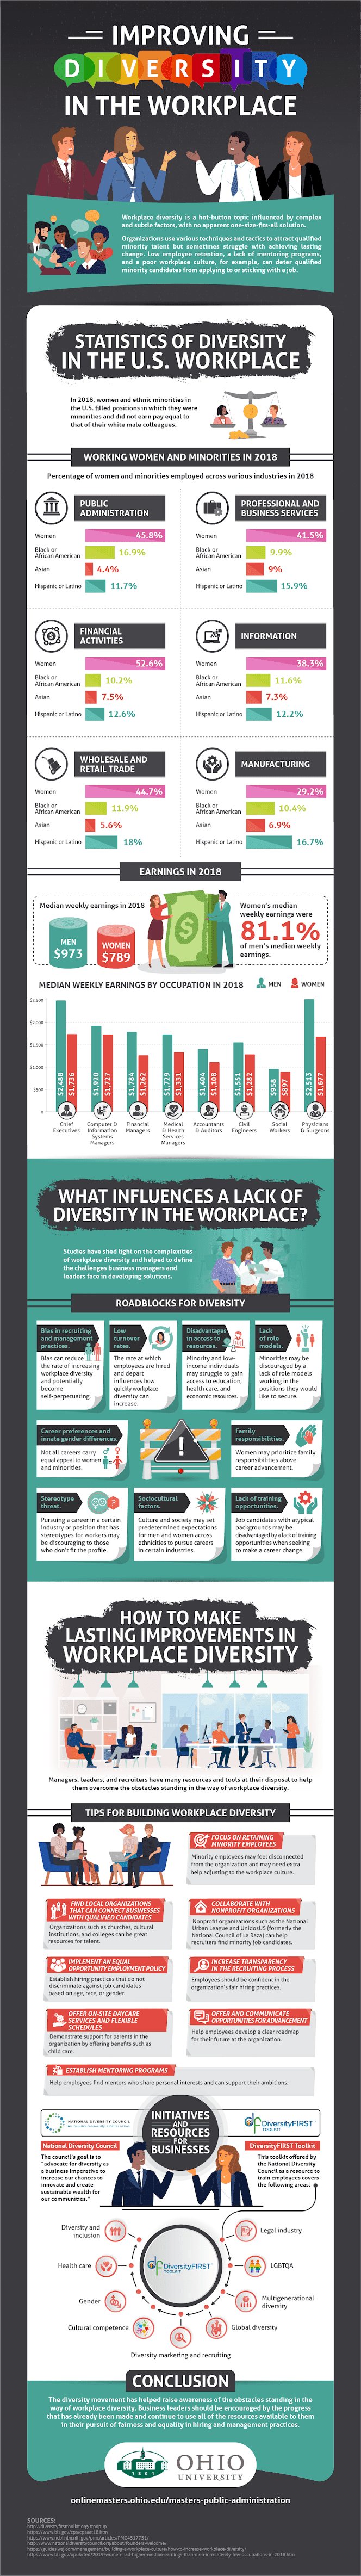 Improving Diversity in the Workplace #infographic